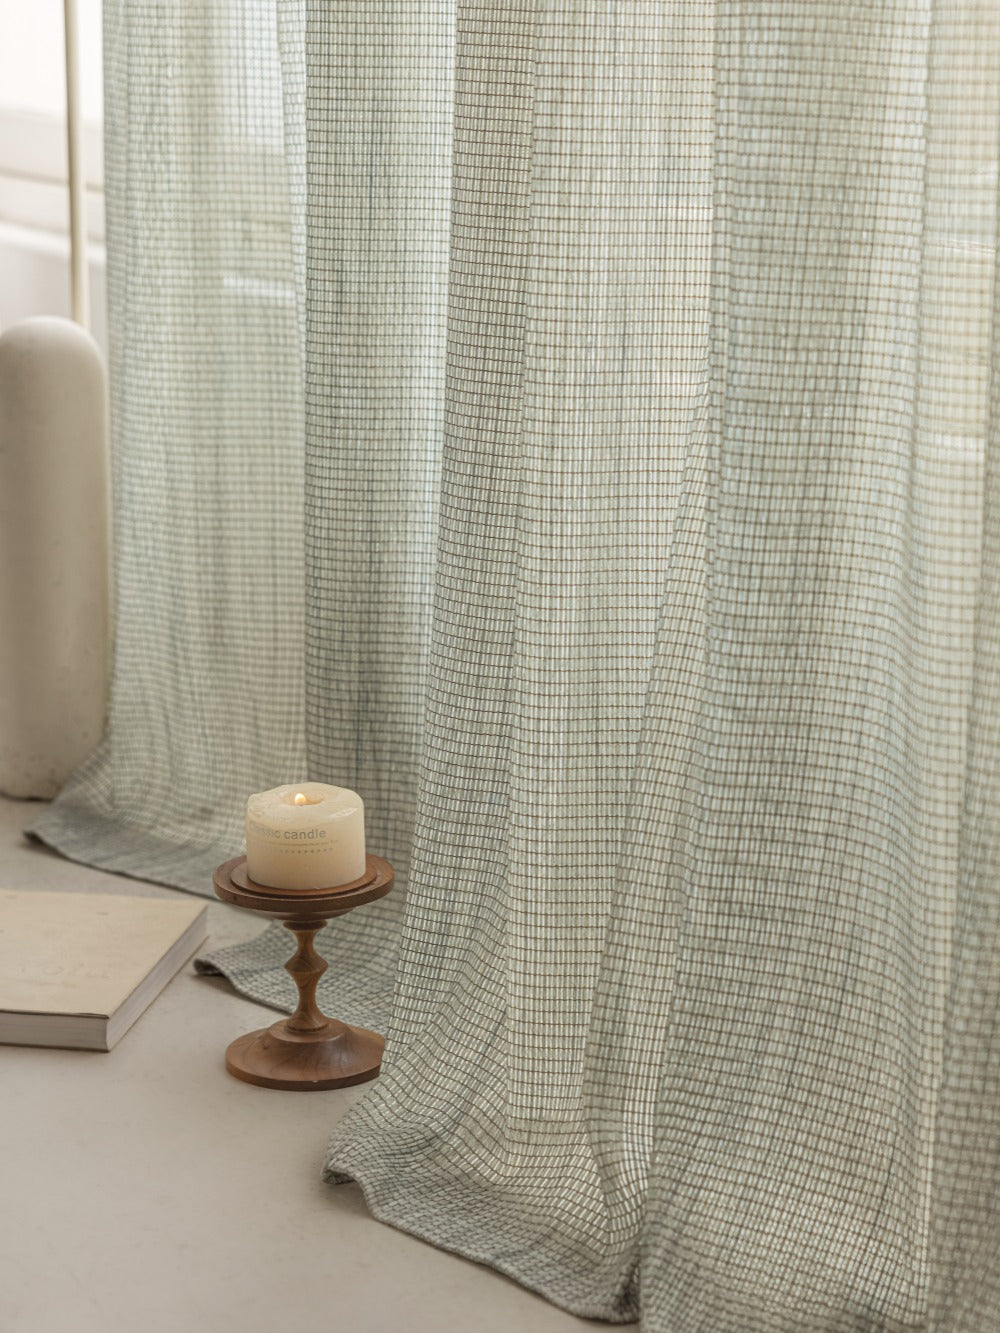 Smoky Green sheer curtain with intricate mesh weaving imported from Germany, displayed in a serene room setting enhancing a sophisticated home decor